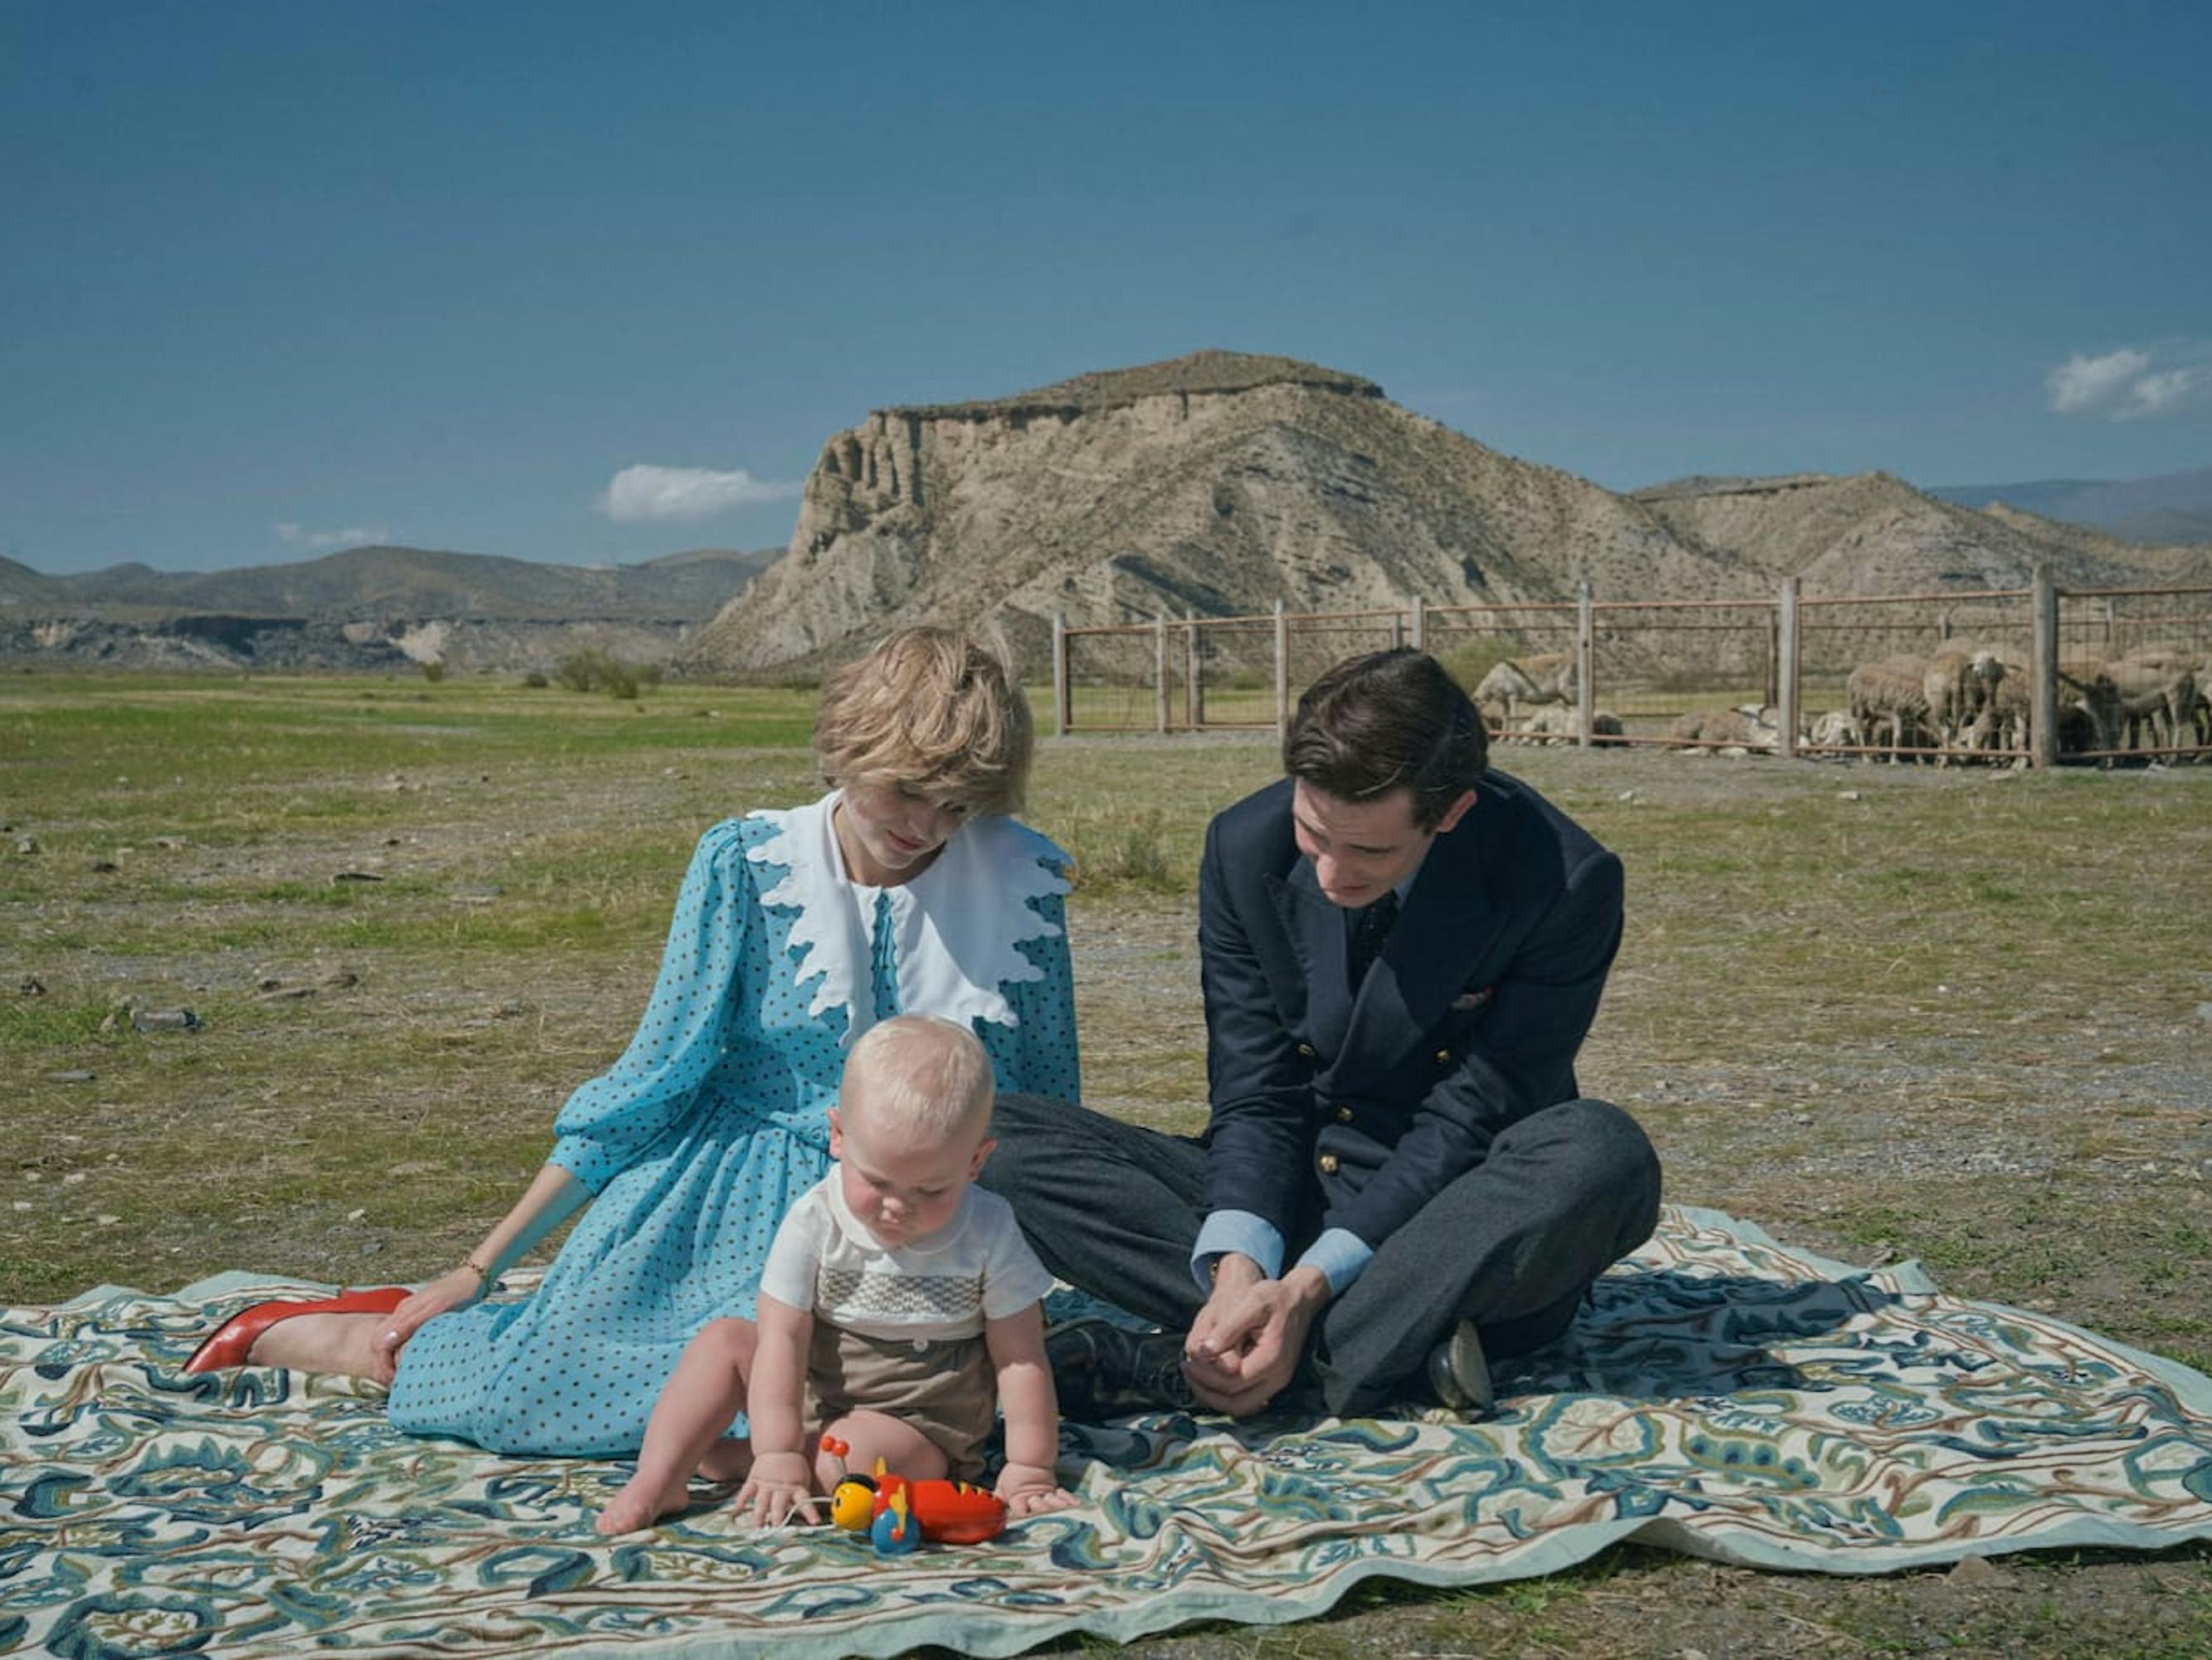 Princess Diana (Emma Corrin) and Prince Charles (Josh O’Connor) sit on a picnic blanket with their son. There is a blue sky and plateau behind them.